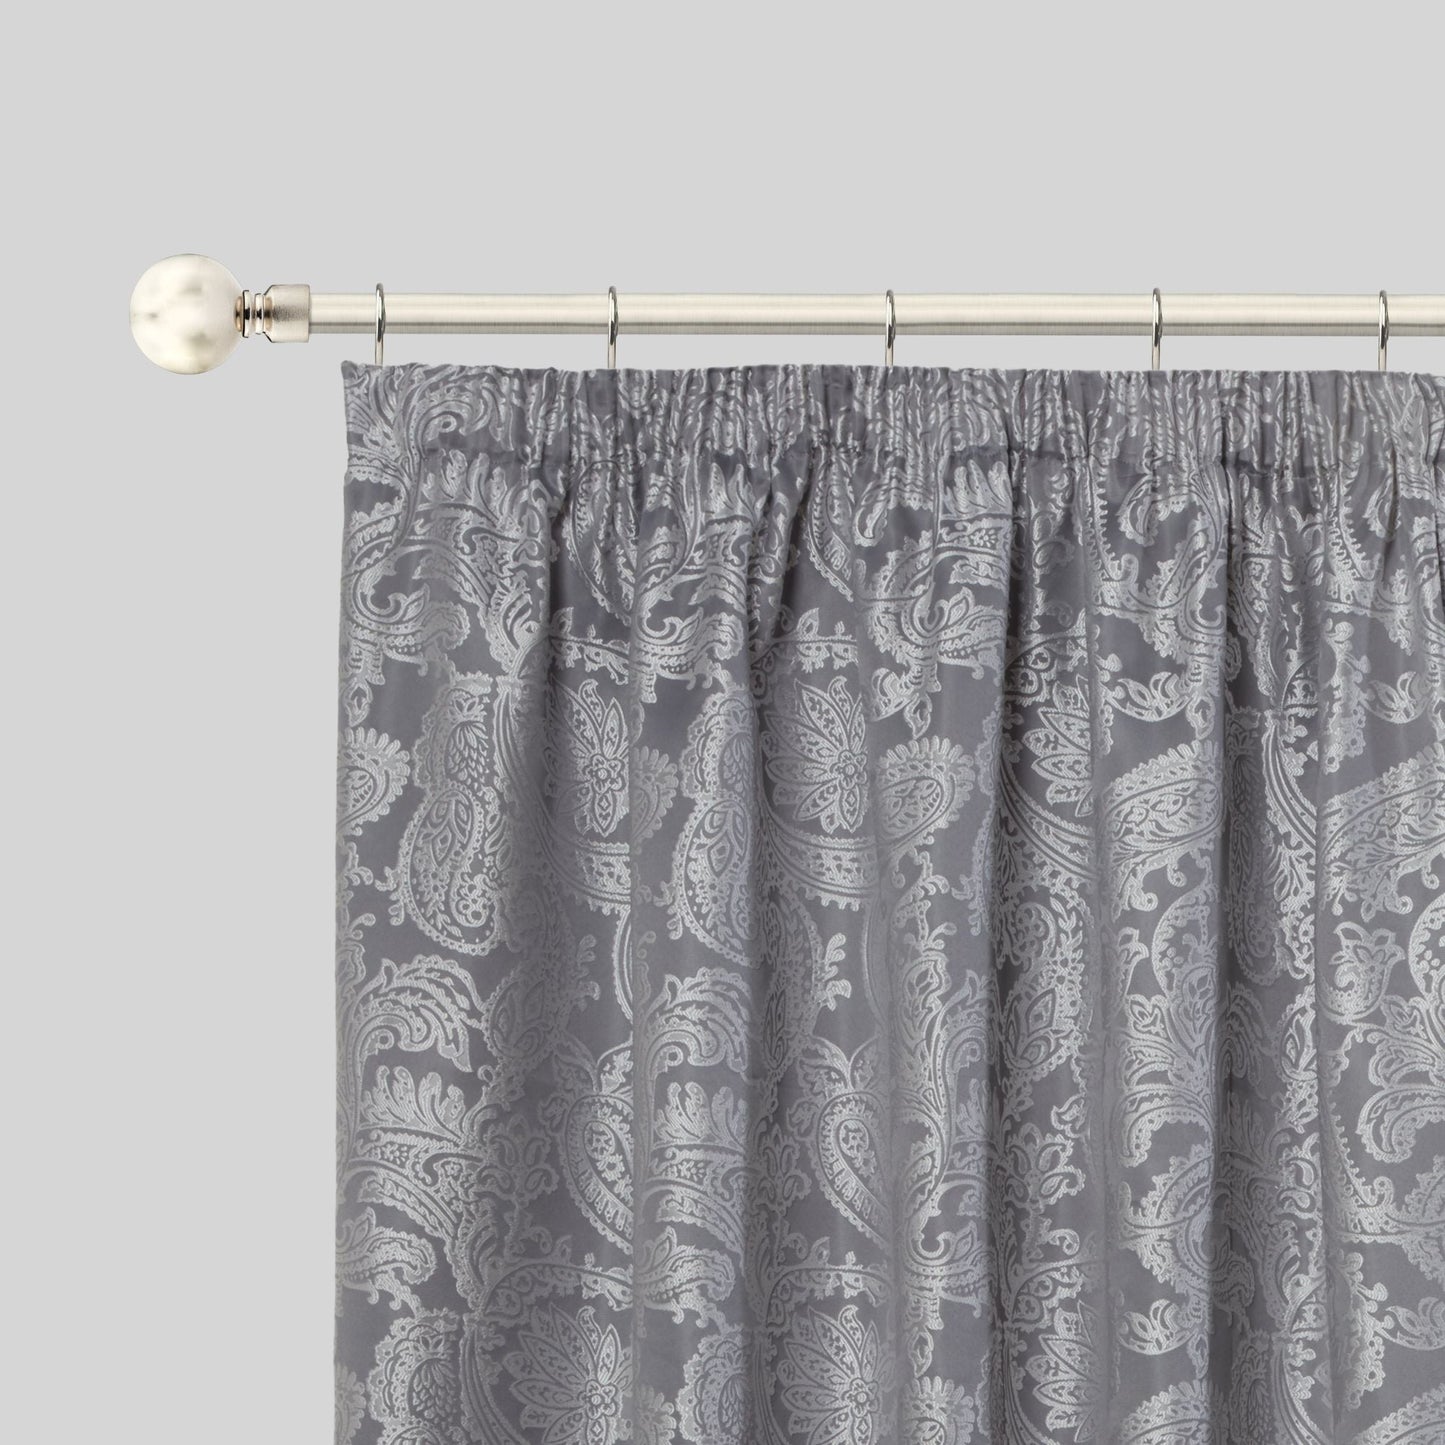 Brushed Silver Ball Extendable Curtain Pole with Rings